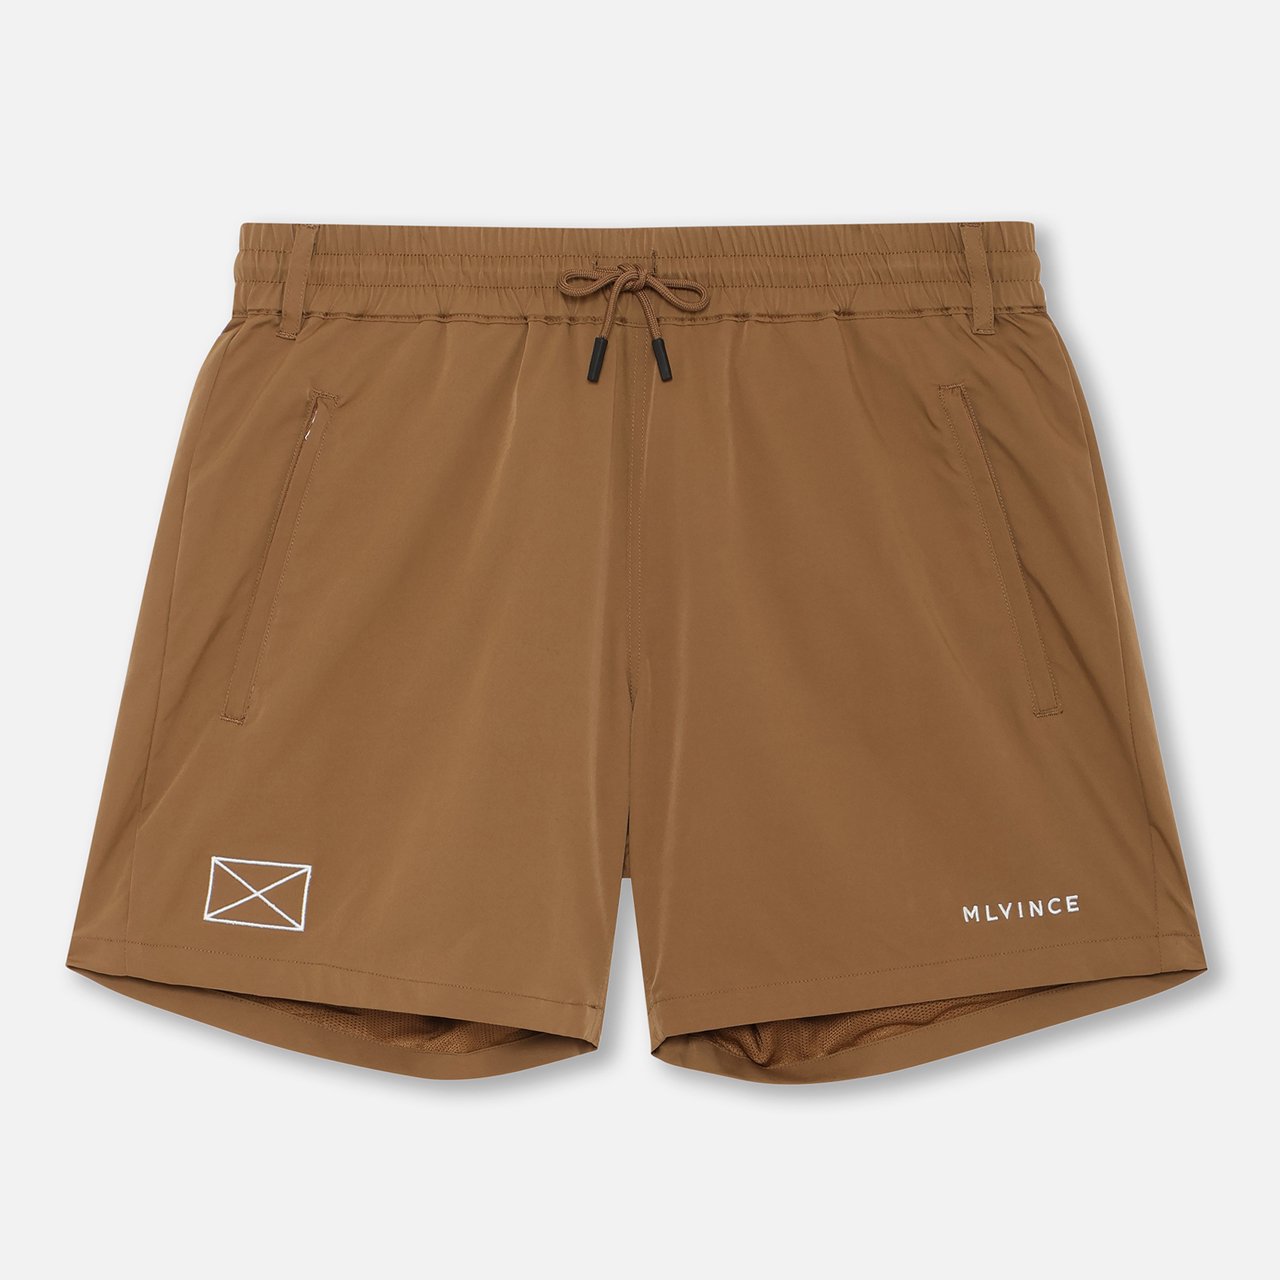 MLVINCE () | LIMONTA CLASSIC LOGO SHORTS BROWN